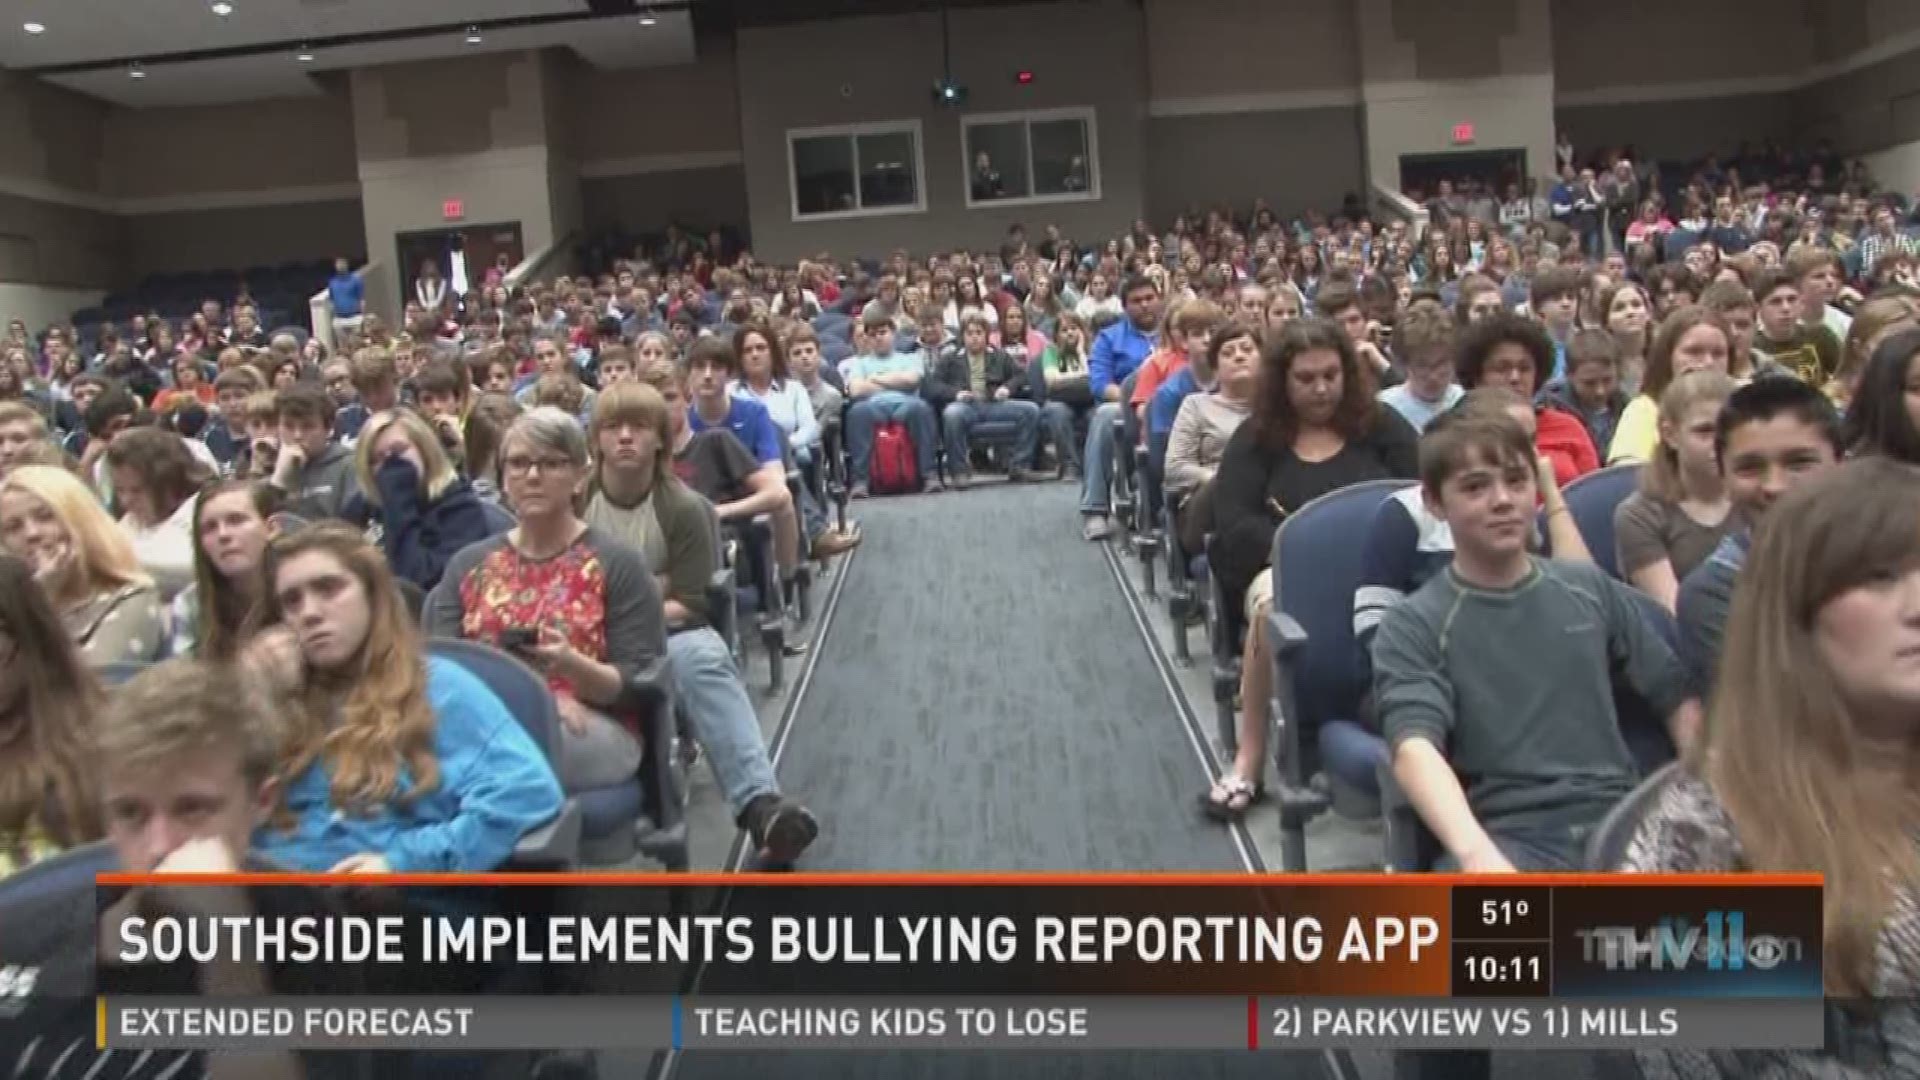 Southside implements bullying reporting app